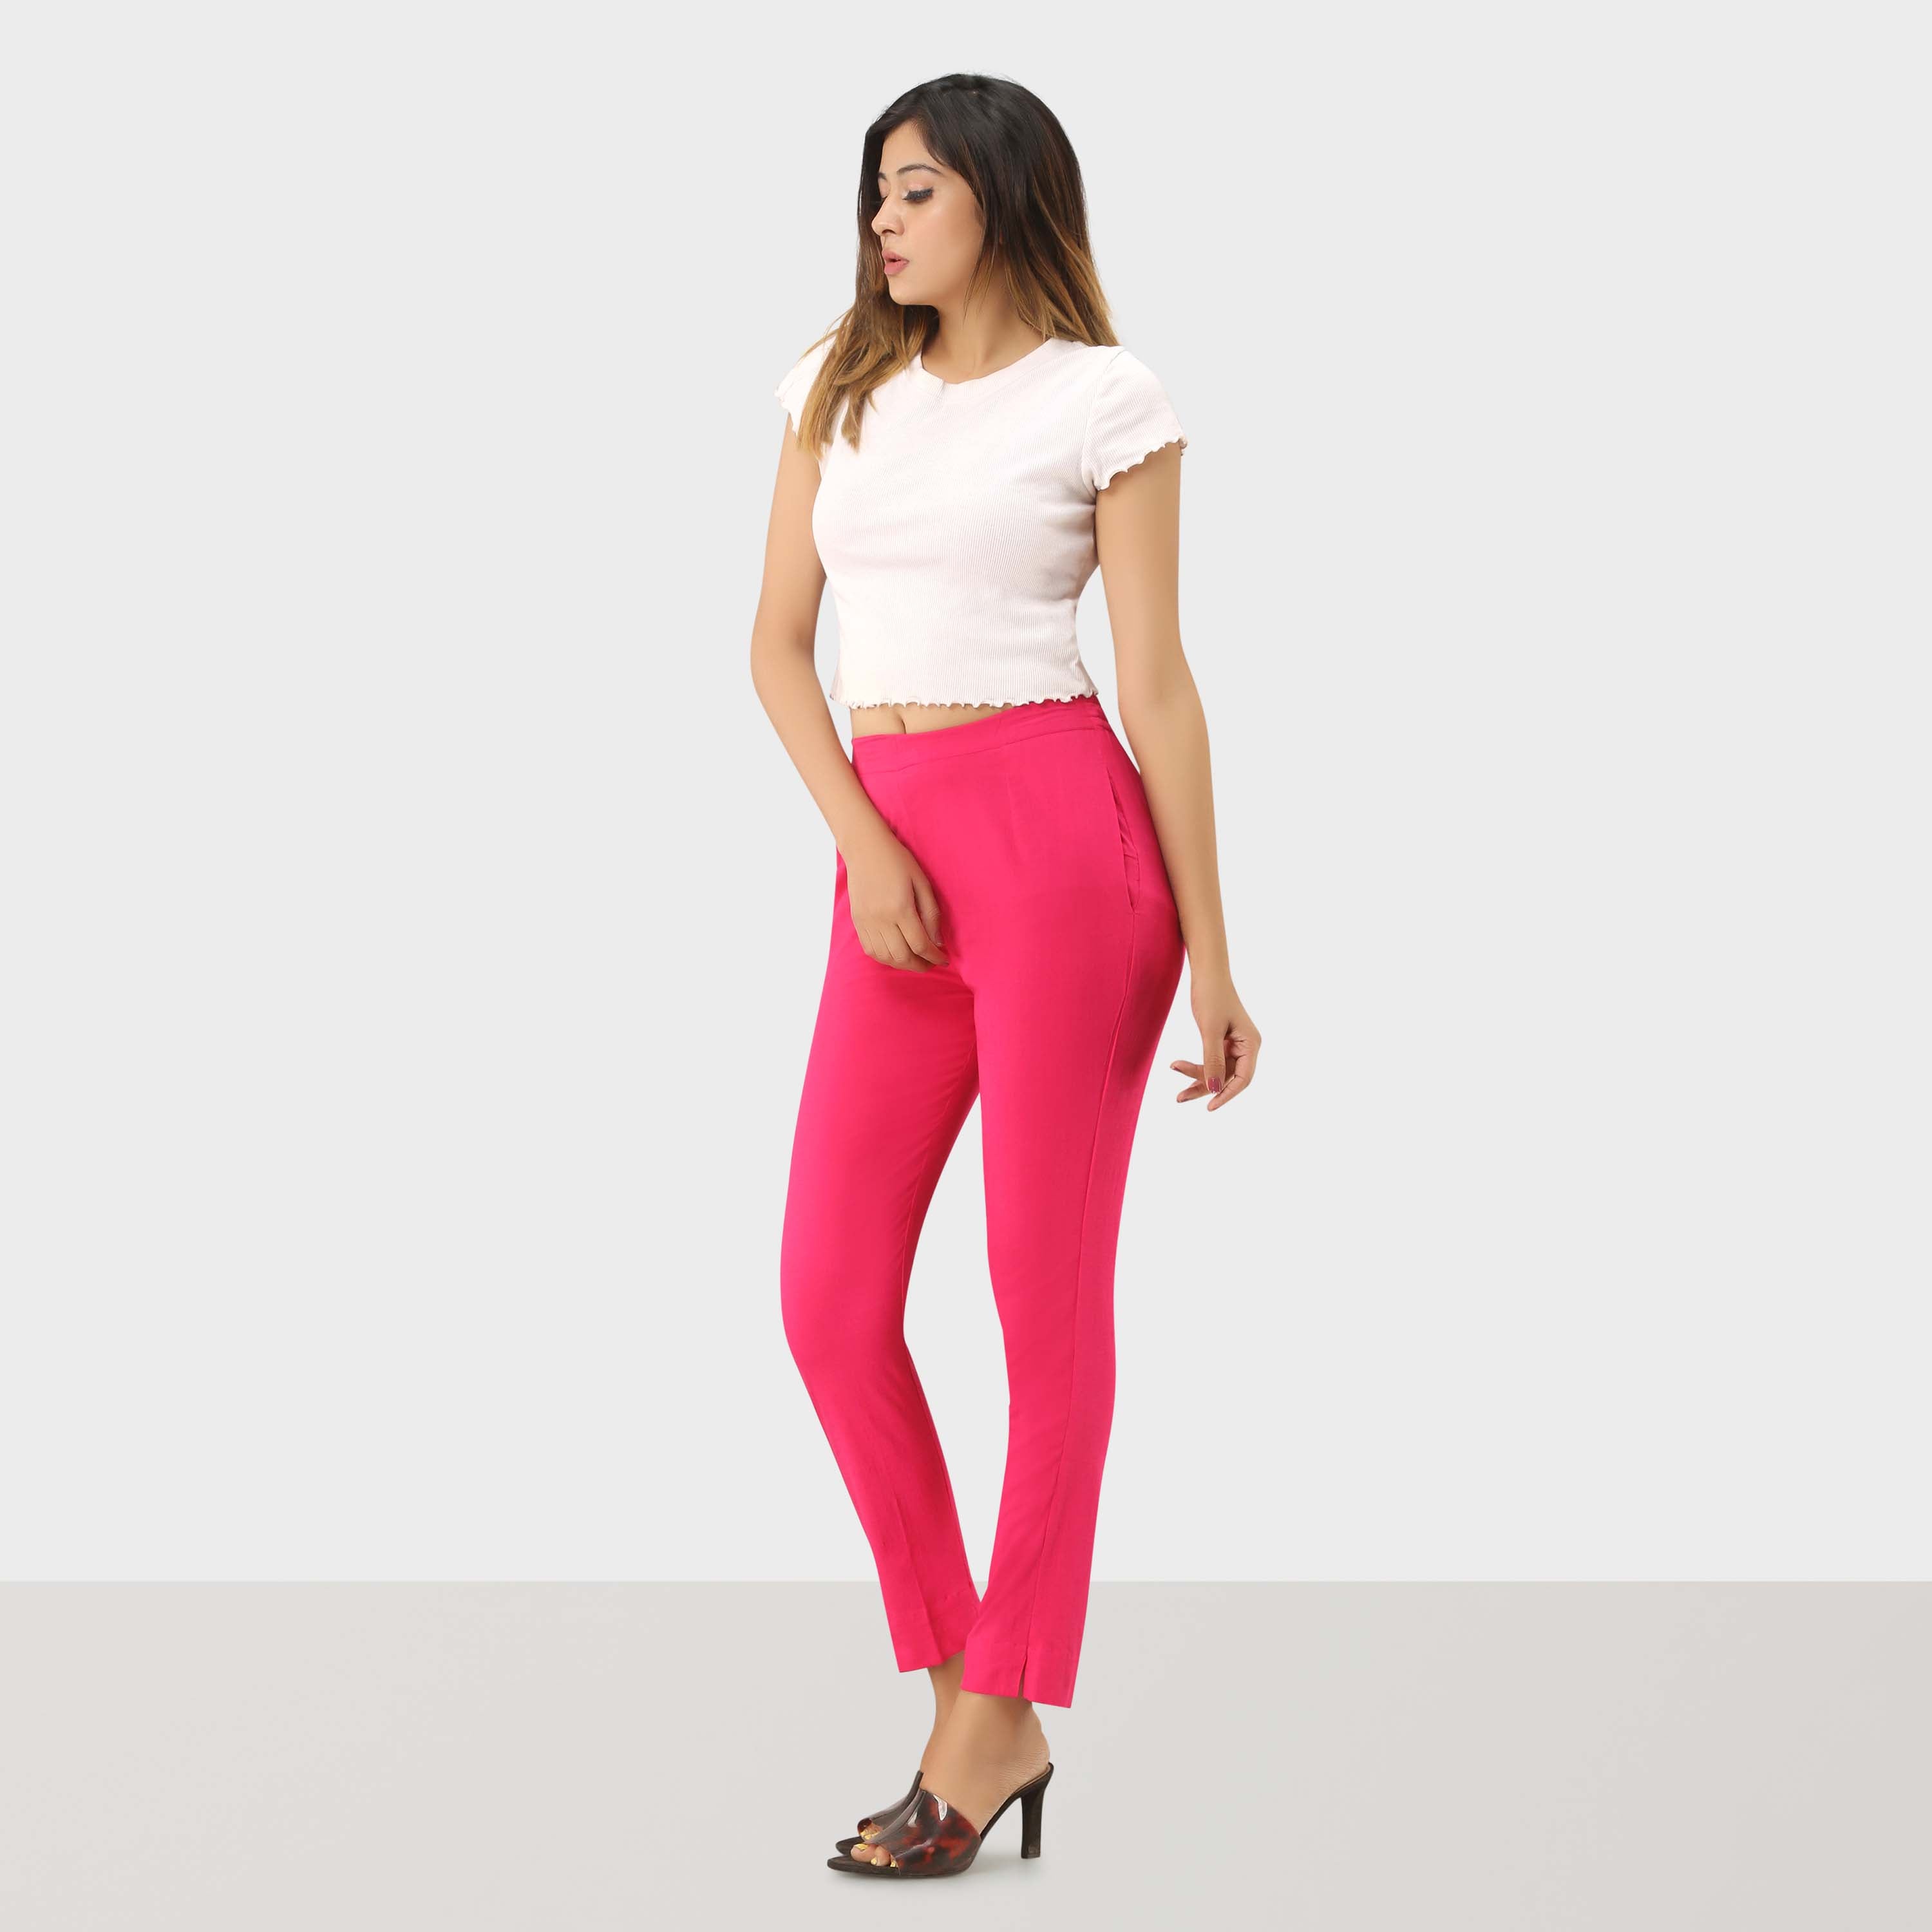 Buy TALES & STORIES Solid Cotton Regular Fit Women's Pants | Shoppers Stop